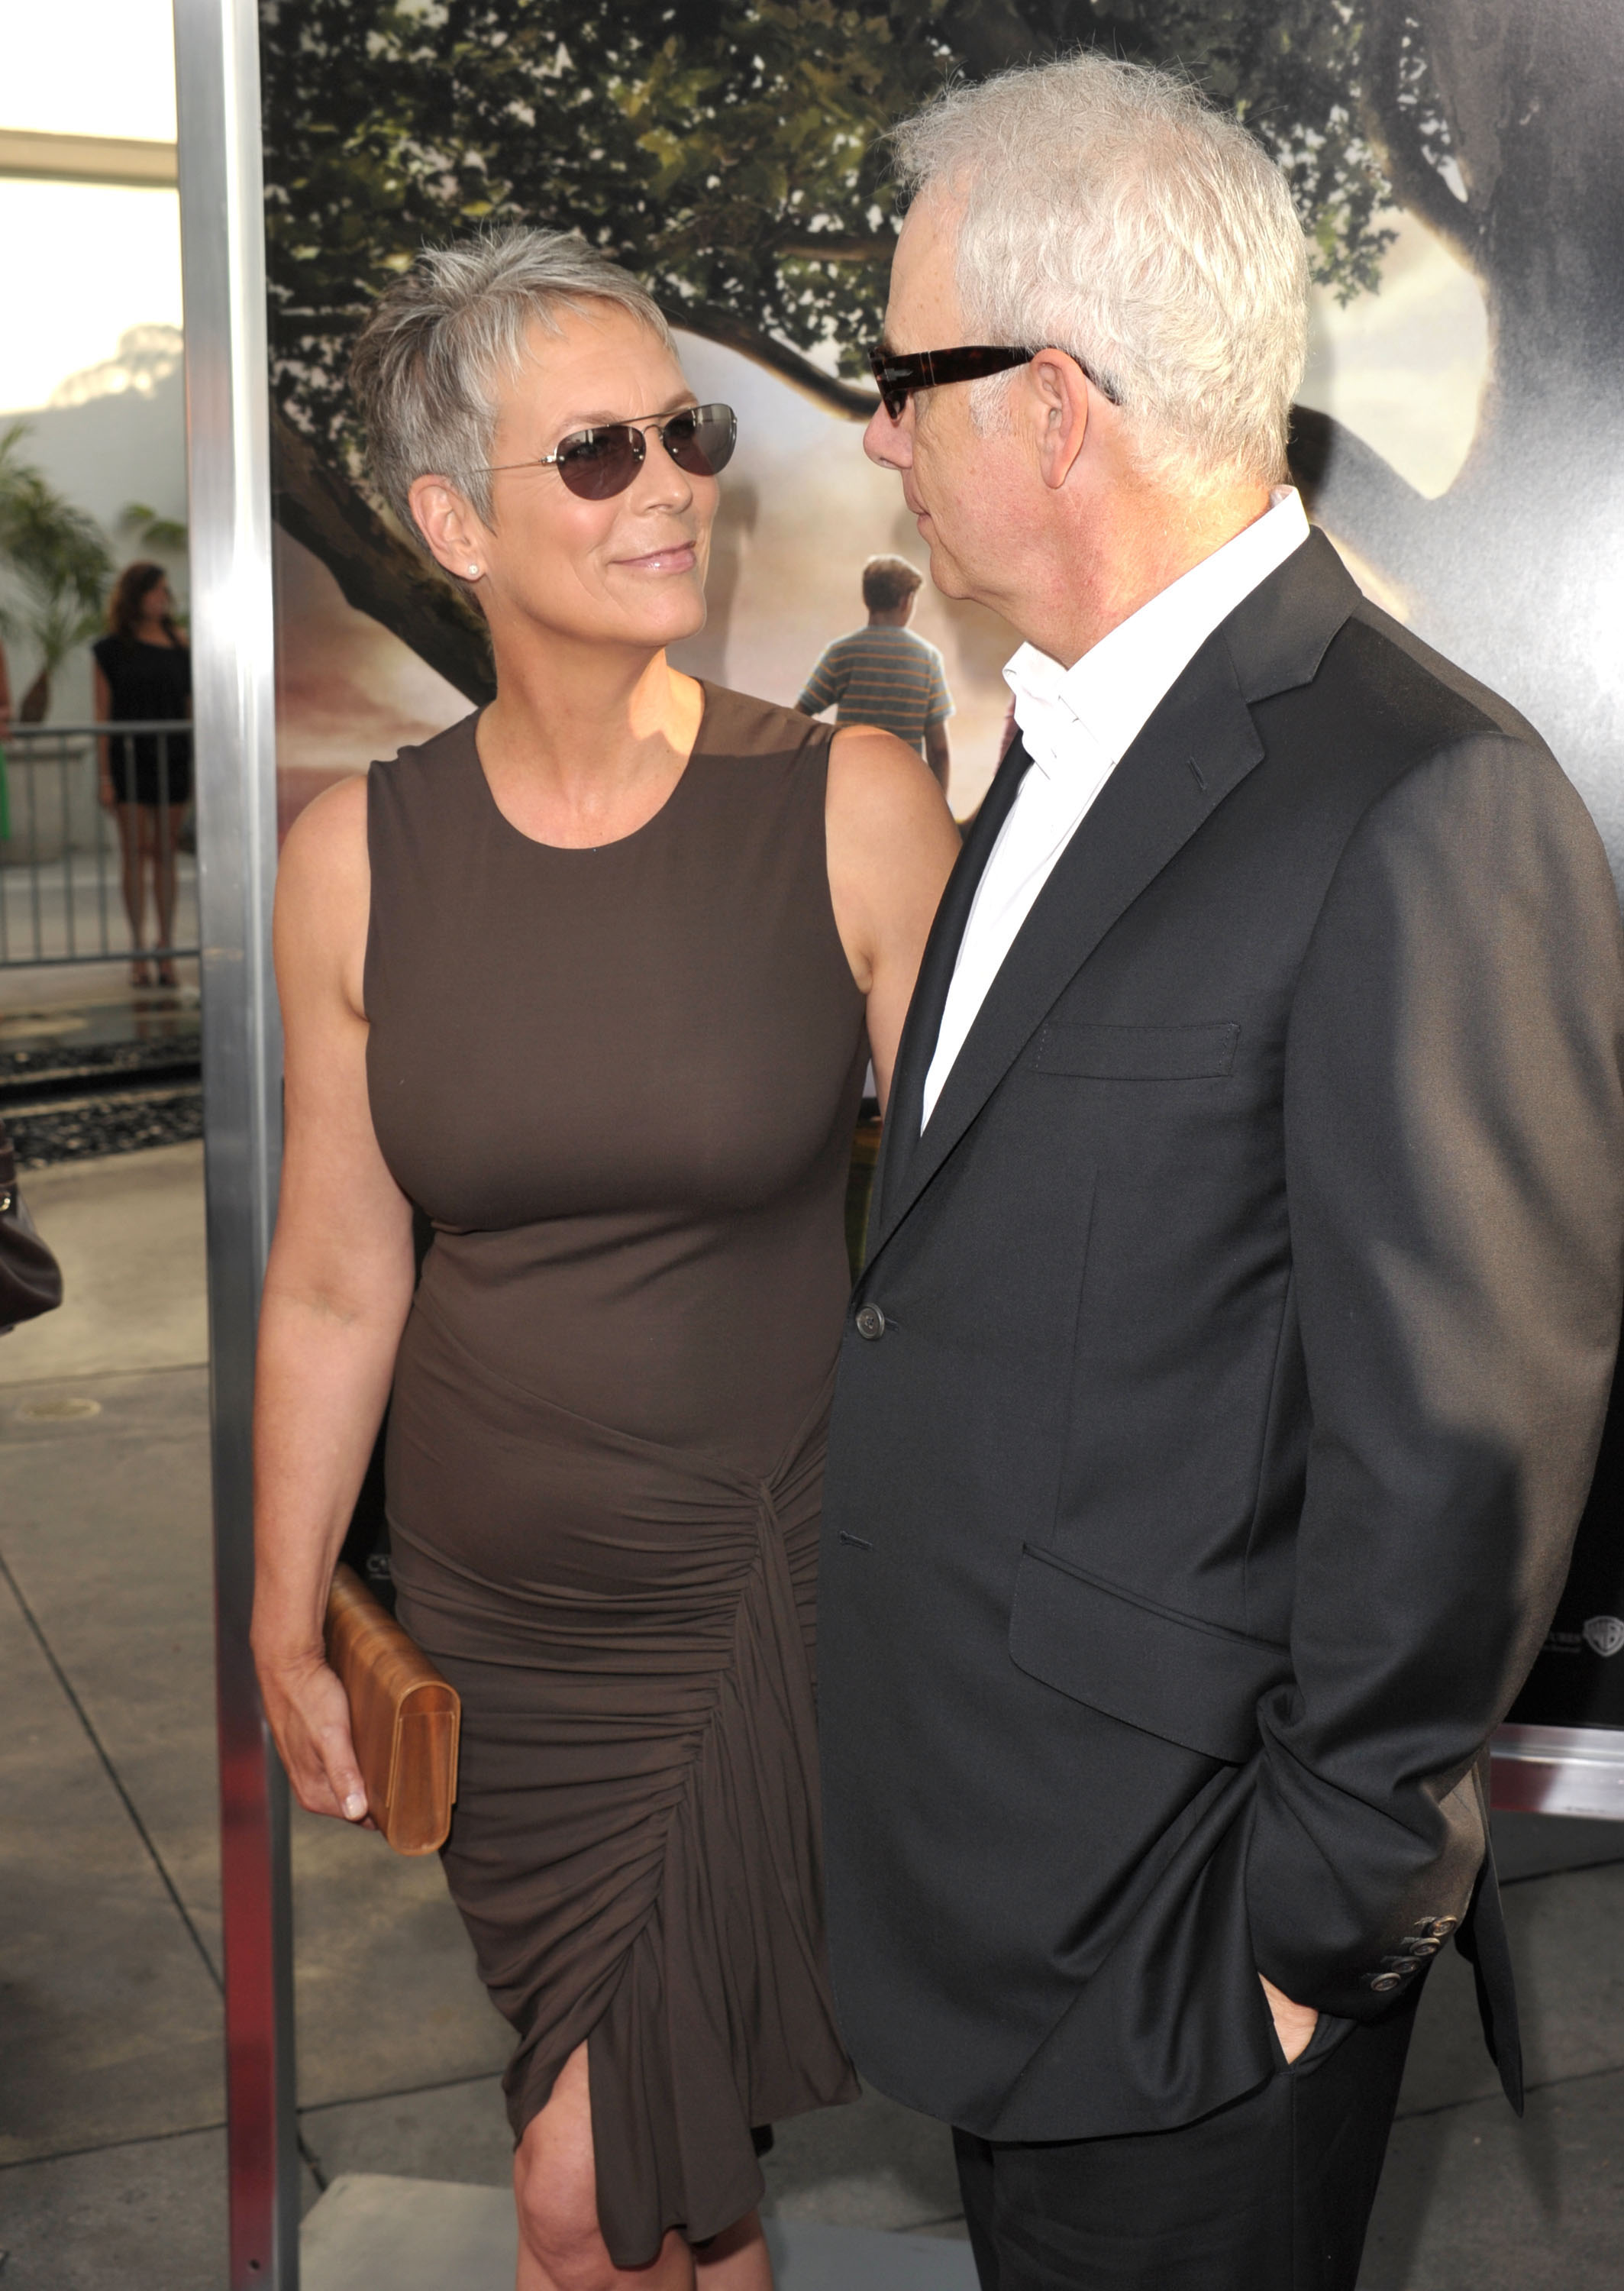 Jamie Lee Curtis and Christopher Guest attend the "Flipped" Los Angeles Premiere at ArcLight Cinemas Cinerama Dome in Hollywood, California on July 26, 2010. | Source: Getty Images